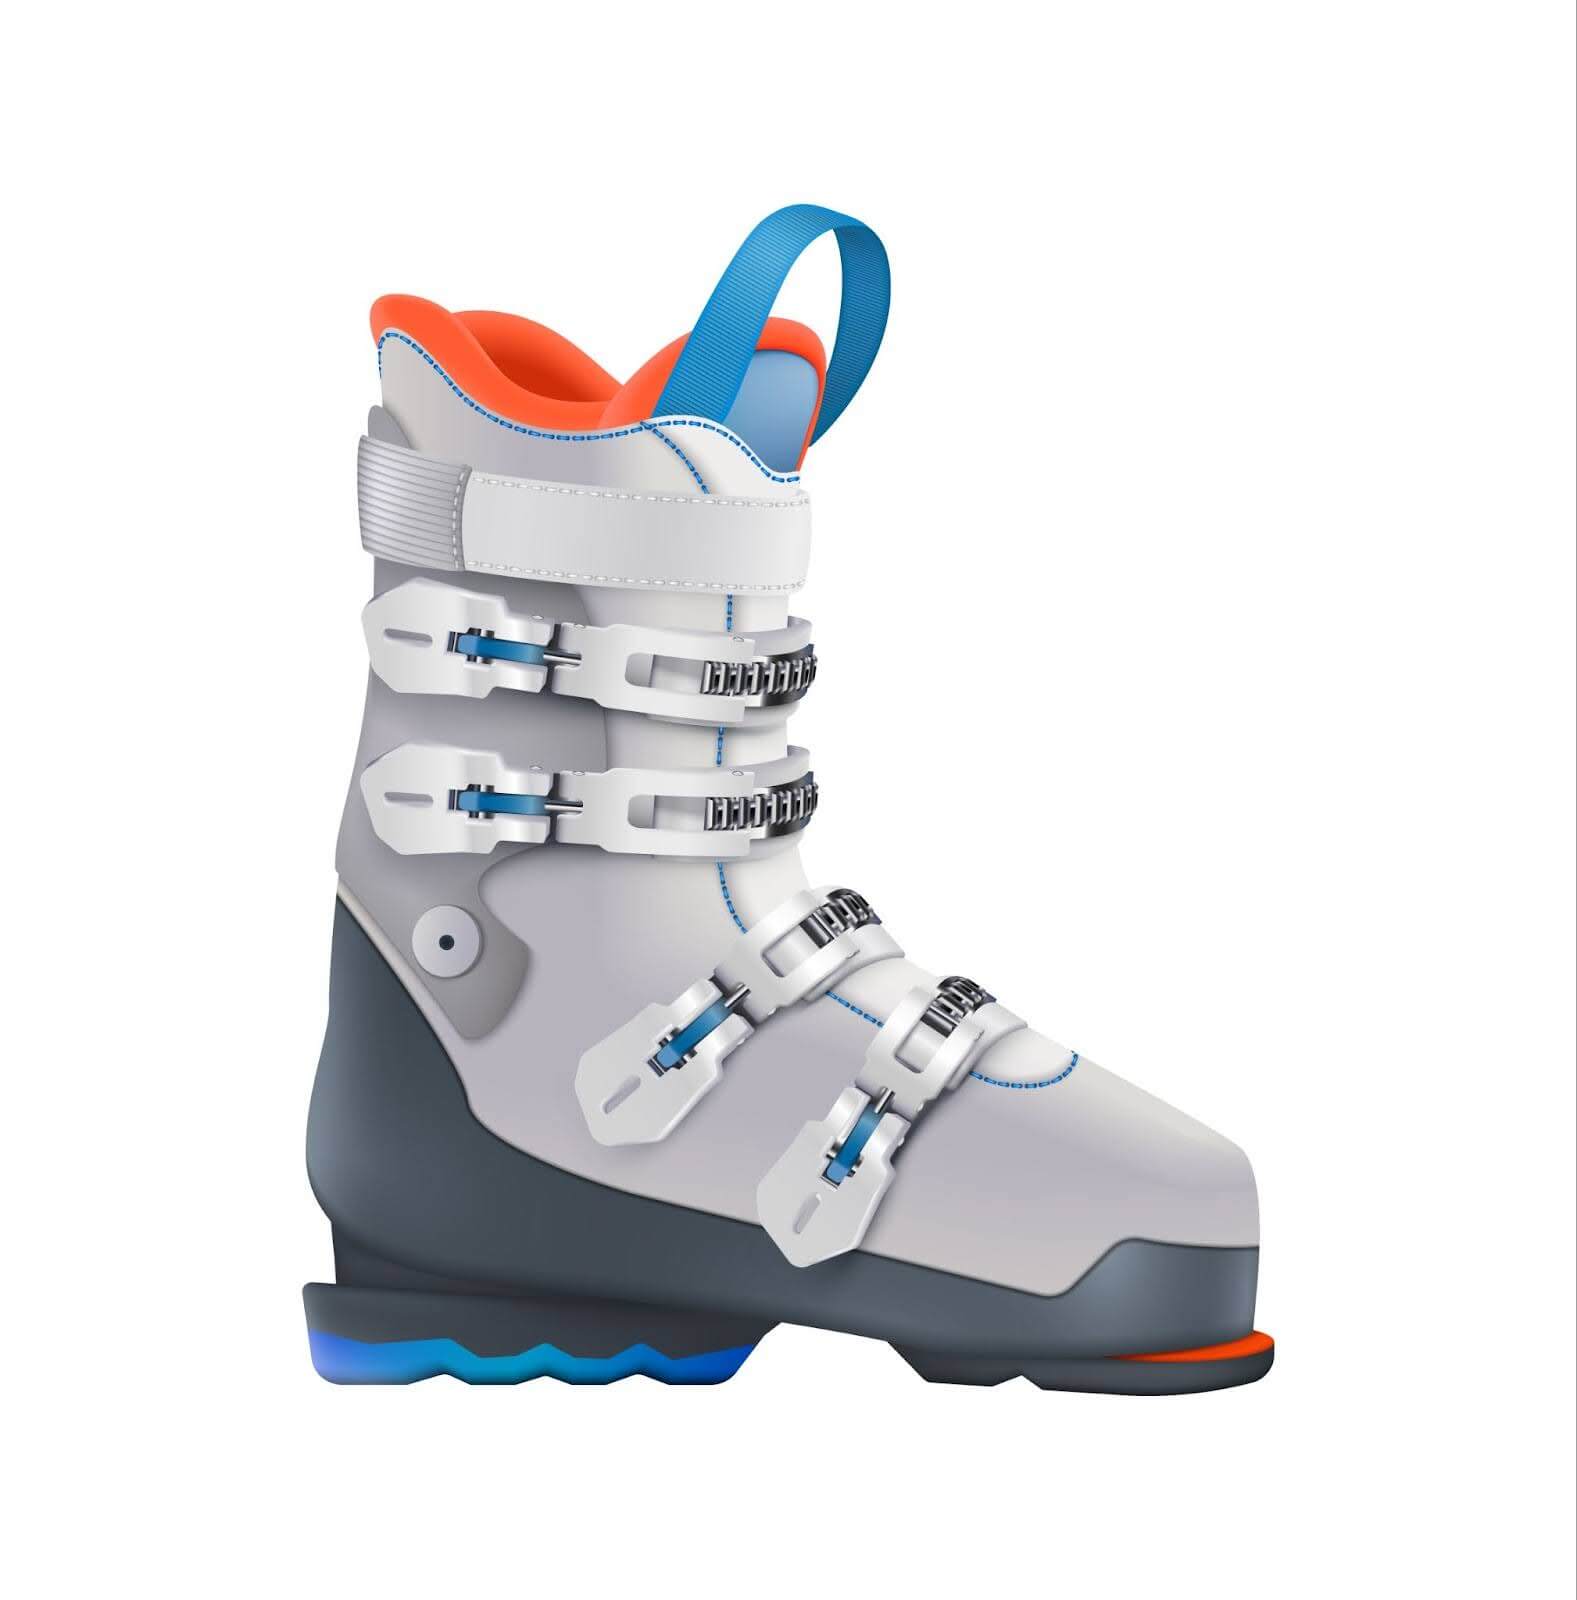 Snowboard Boots: Styles and Components